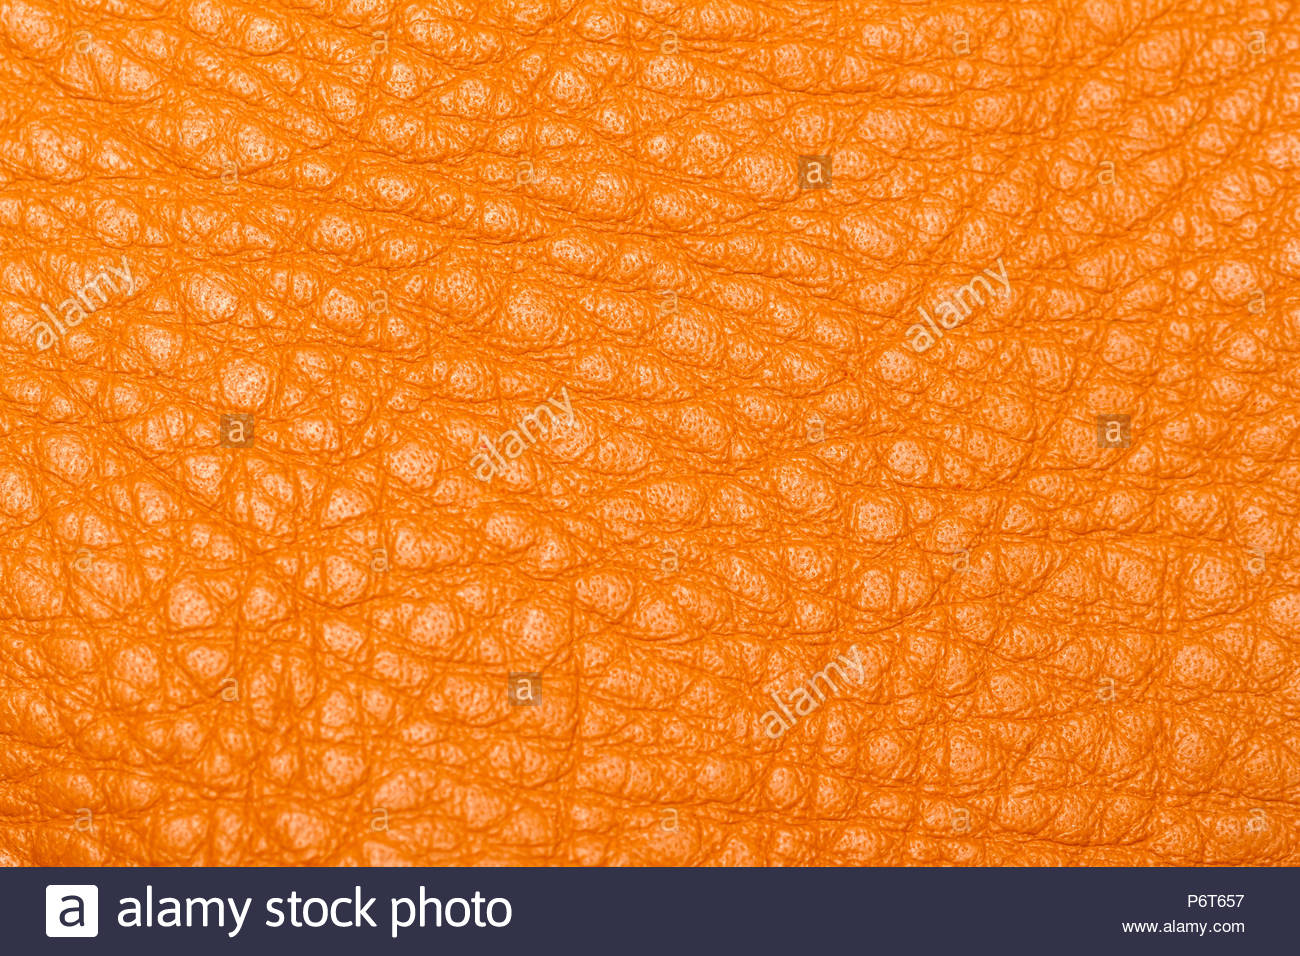 Texture Of Genuine Leather Close Up Cowhide Background Stock